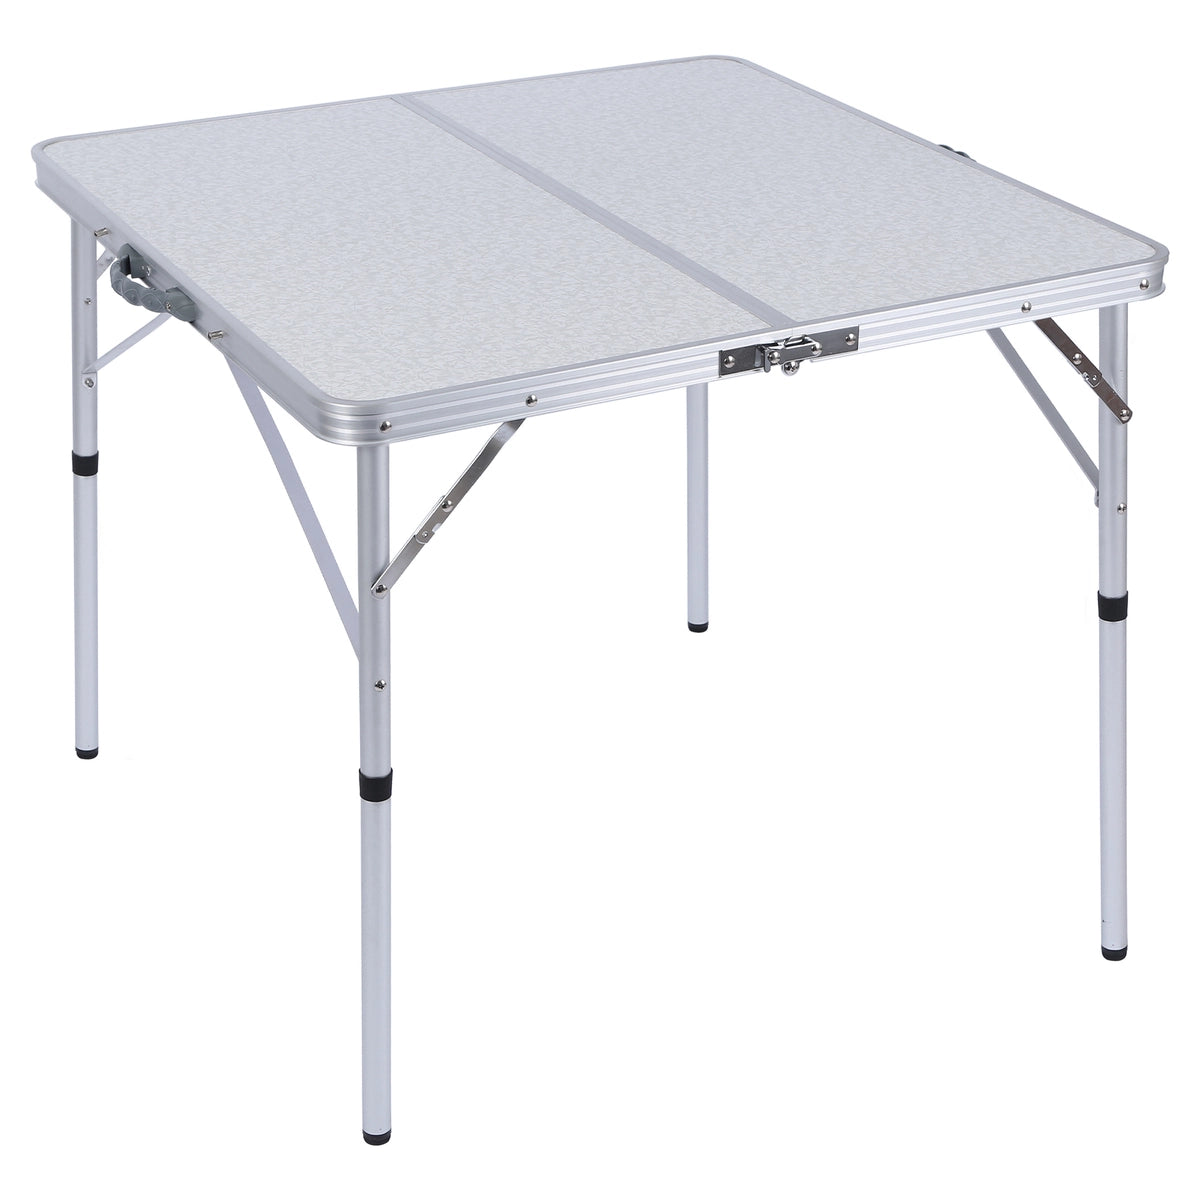 Small Folding Camping Table Adjustable Height